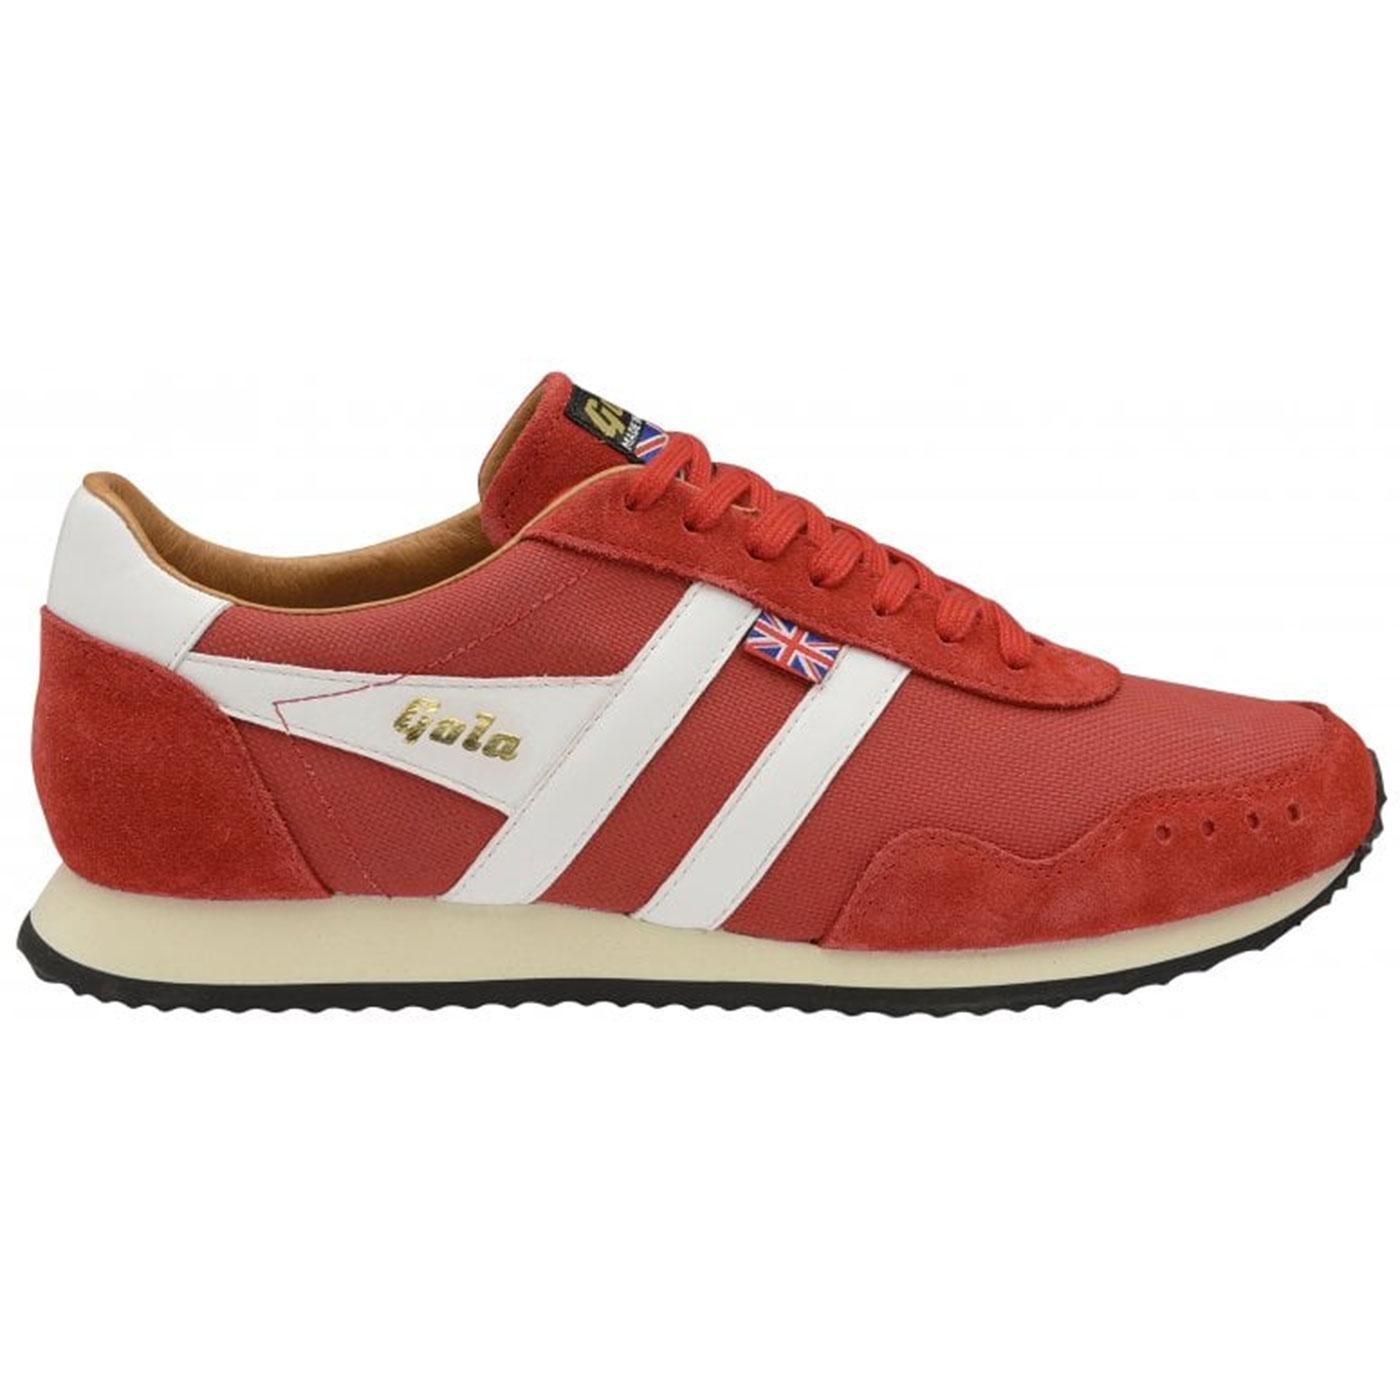 GOLA Track Mesh Made in England Retro 70s Trainers in Red